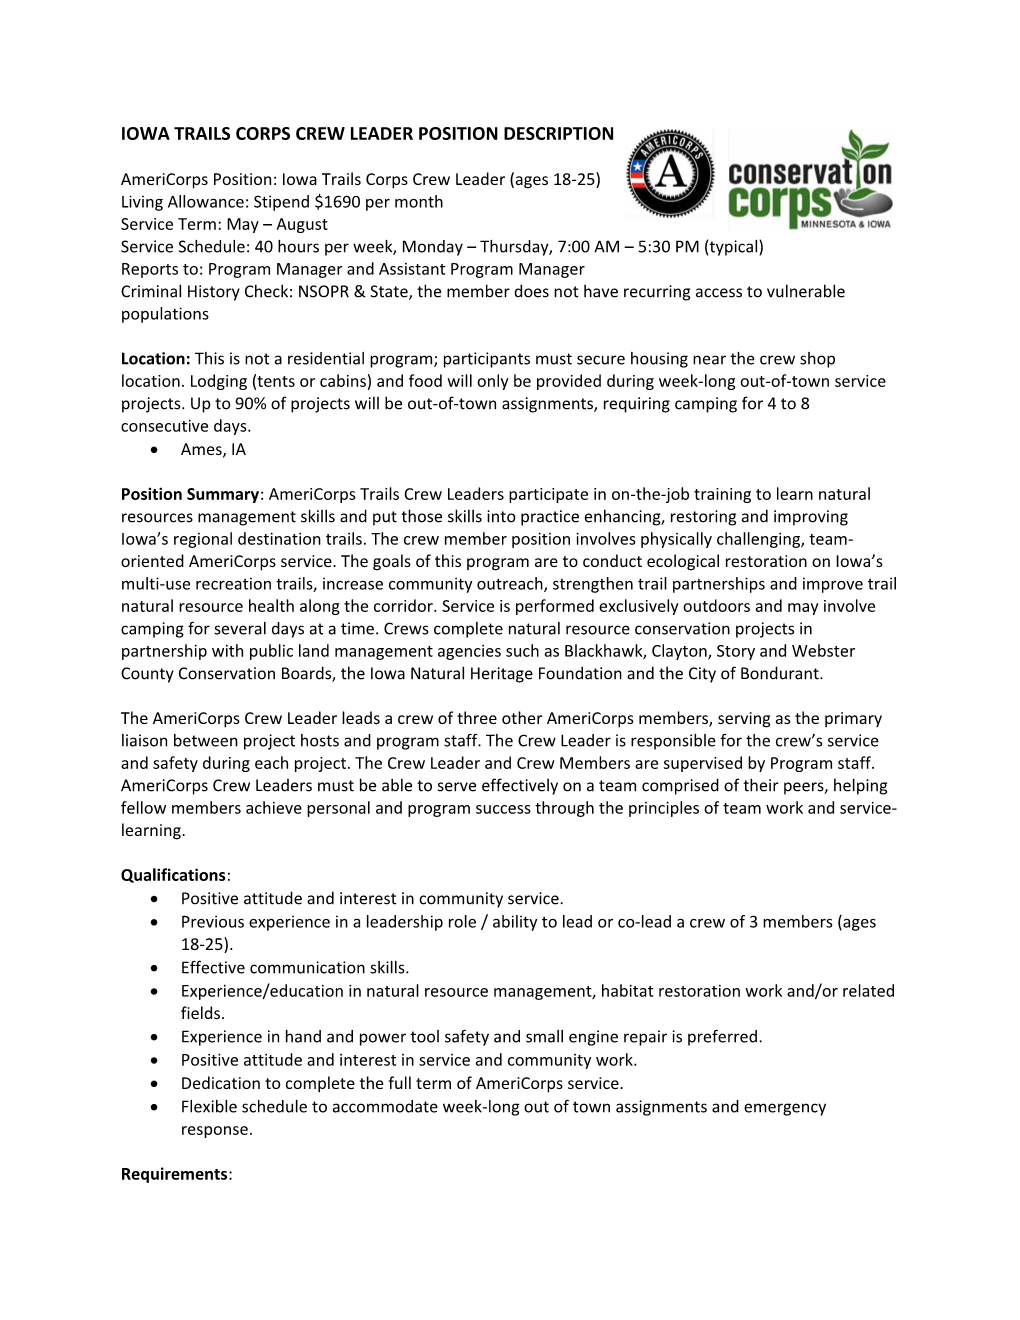 Americorps Position: Iowa Trails Corps Crew Leader (Ages 18-25)